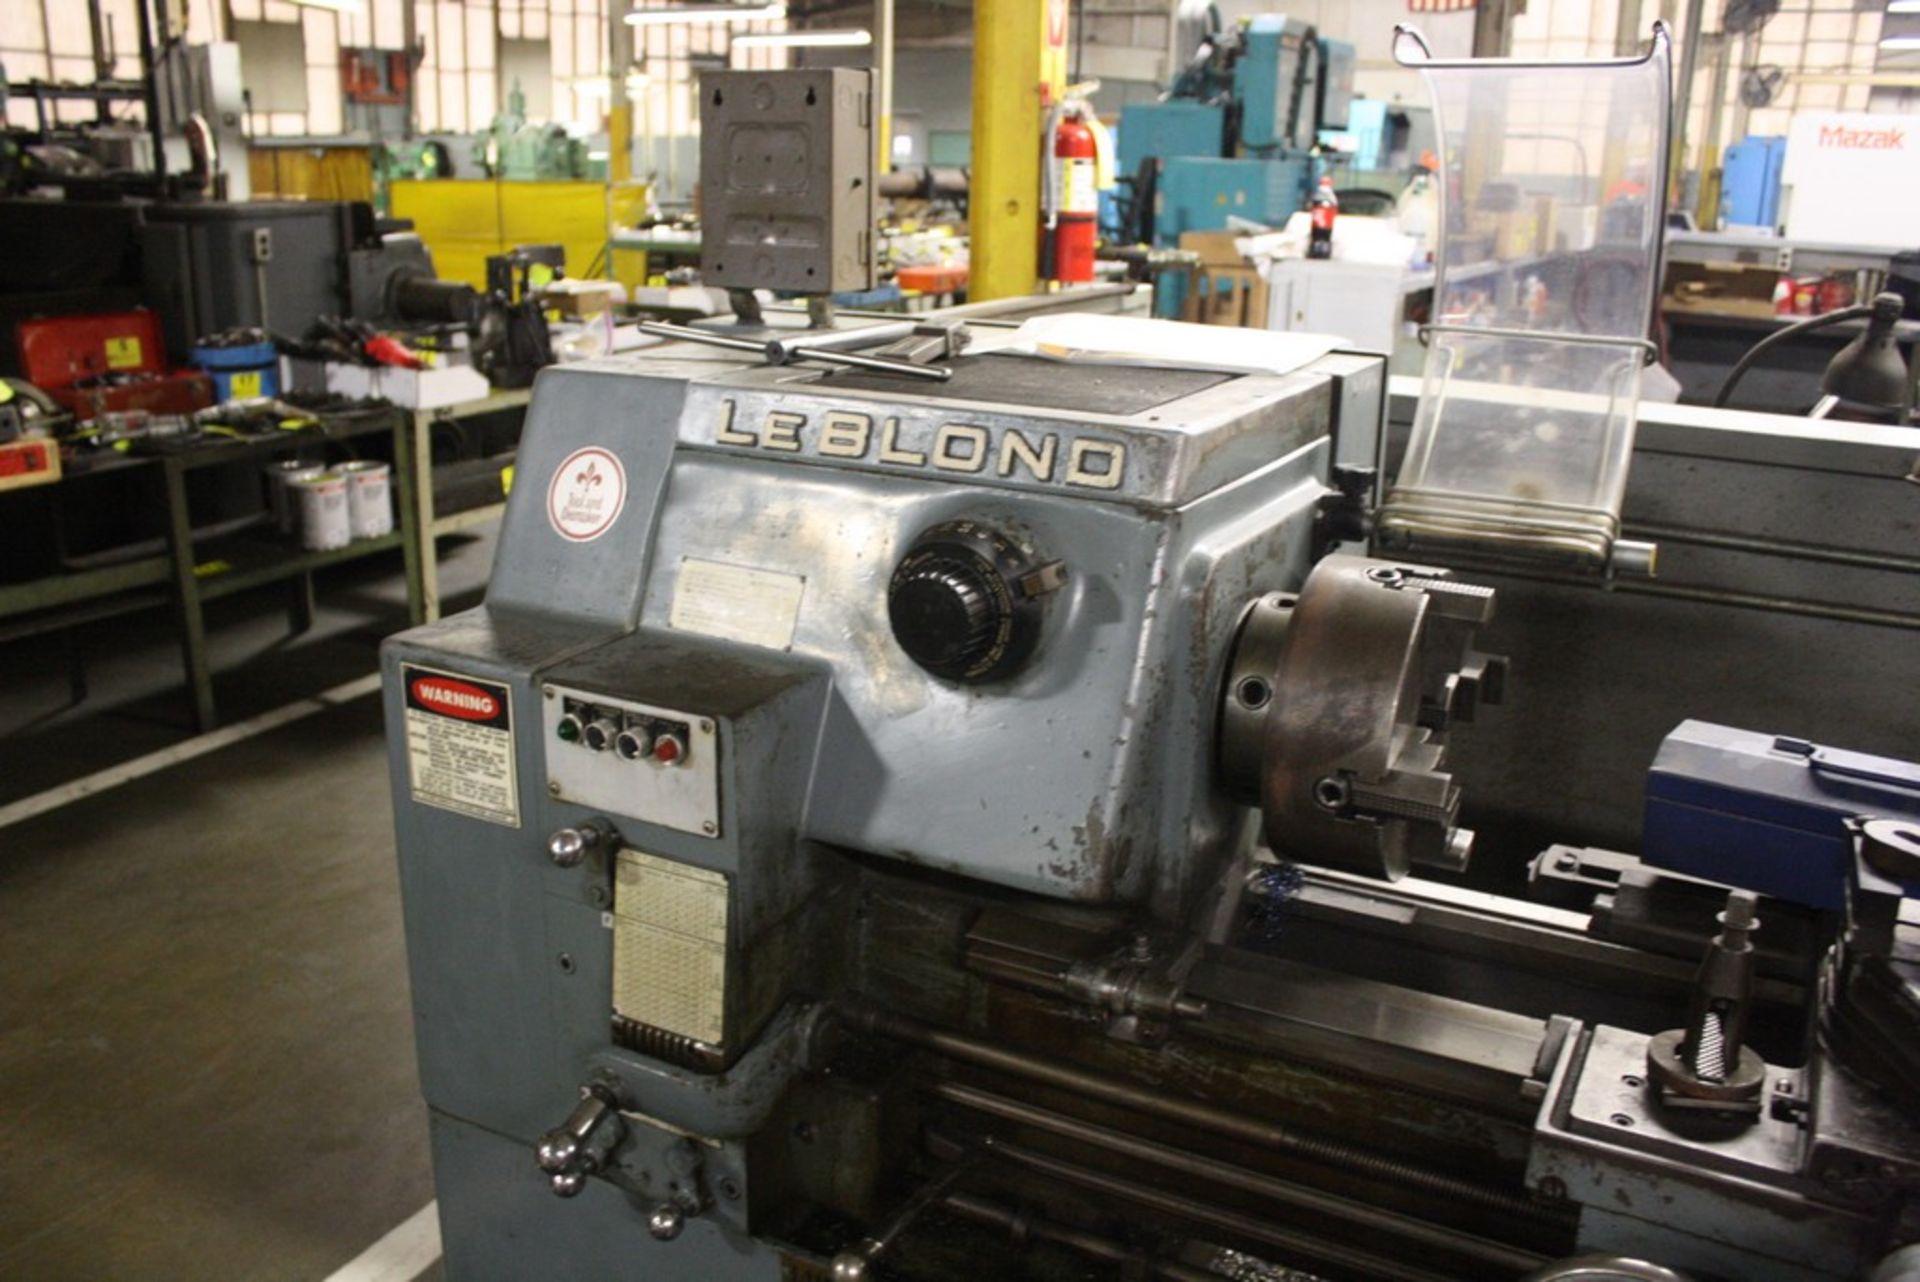 LEBLOND 15" X36" MODEL TOOL & DIE MAKERS LATHE, S/N 6HC-277, 10" 4-JAW CHUCK, 2400 RPM SPINDLE, - Image 2 of 4